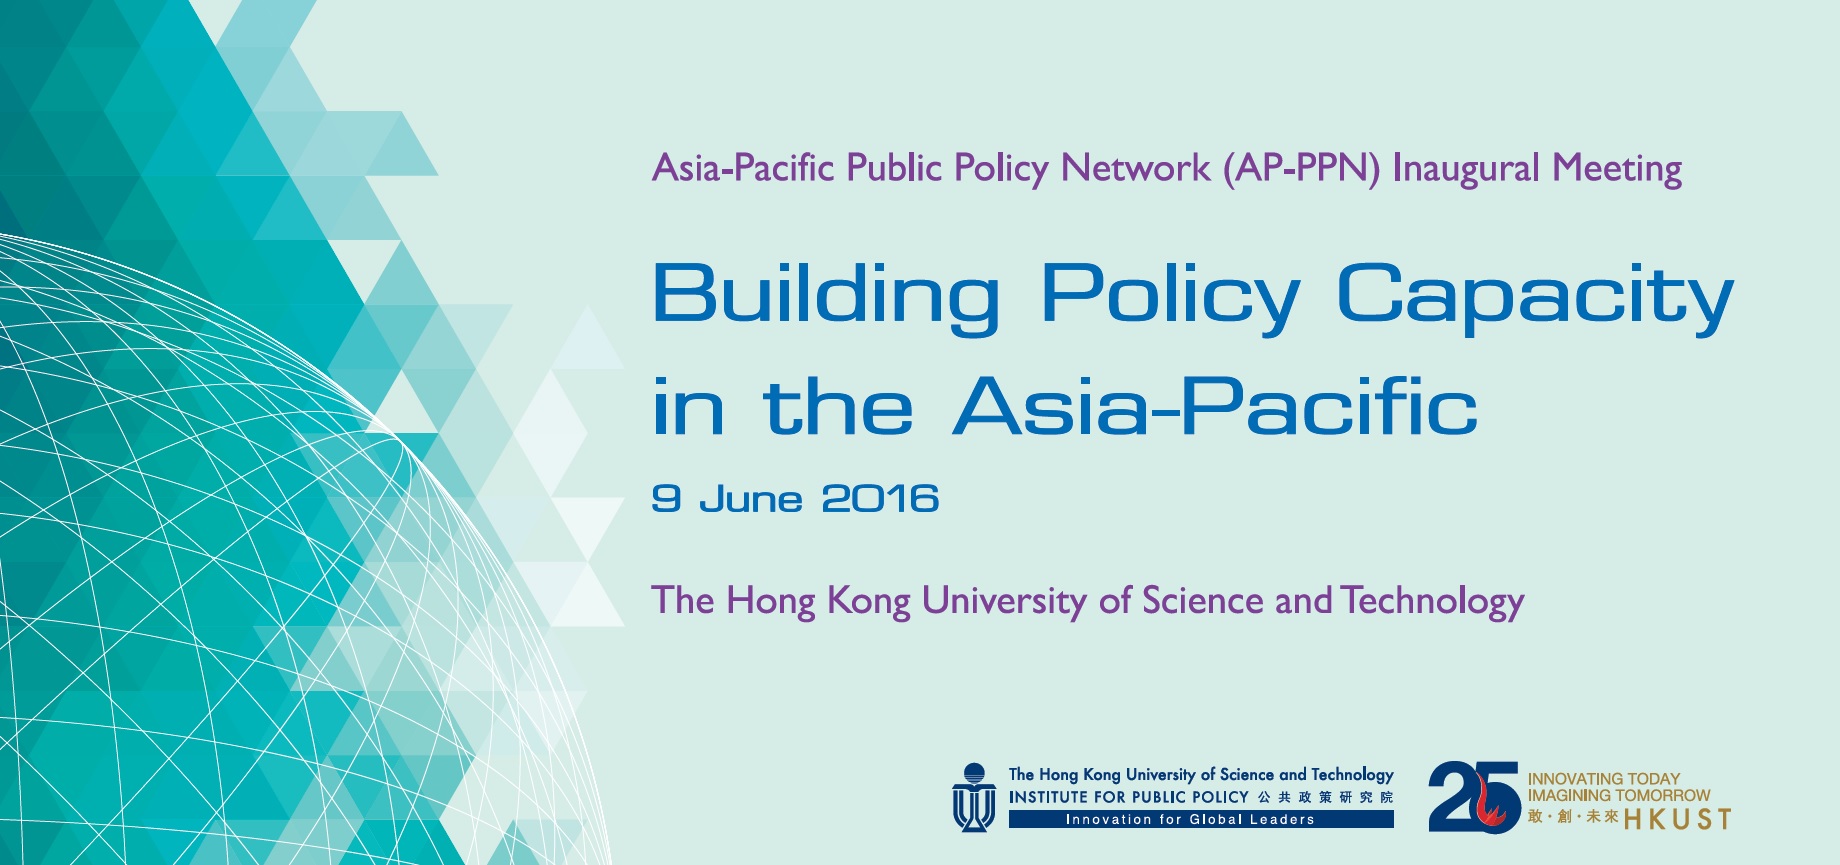 Asia-Pacific Public Policy Network (AP-PPN) Inaugural Meeting